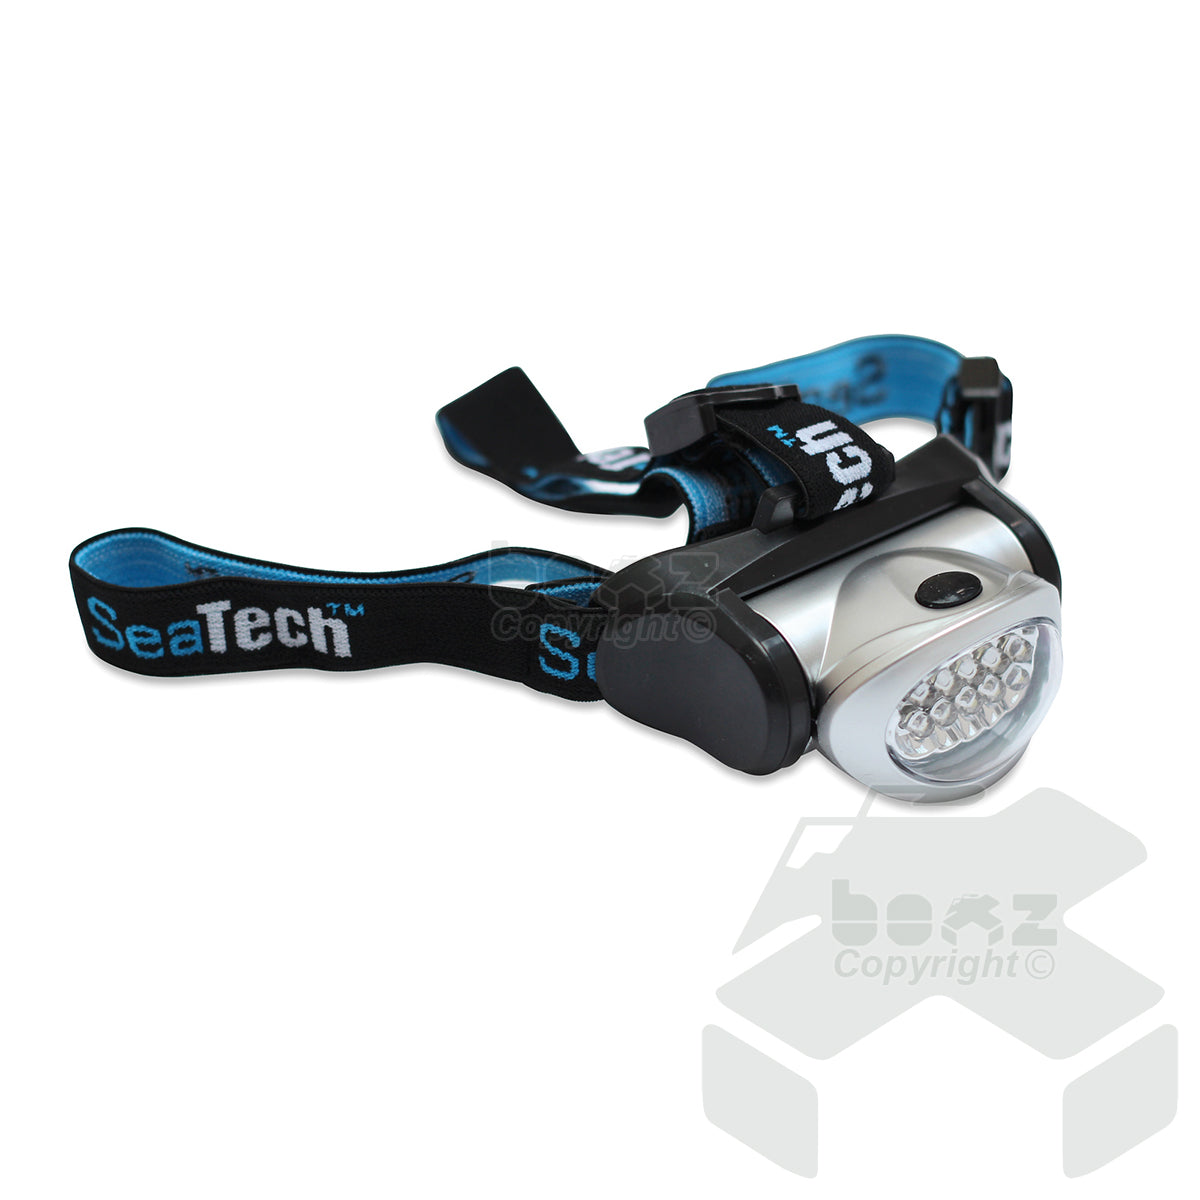 SeaTech 10 LED Head Torch